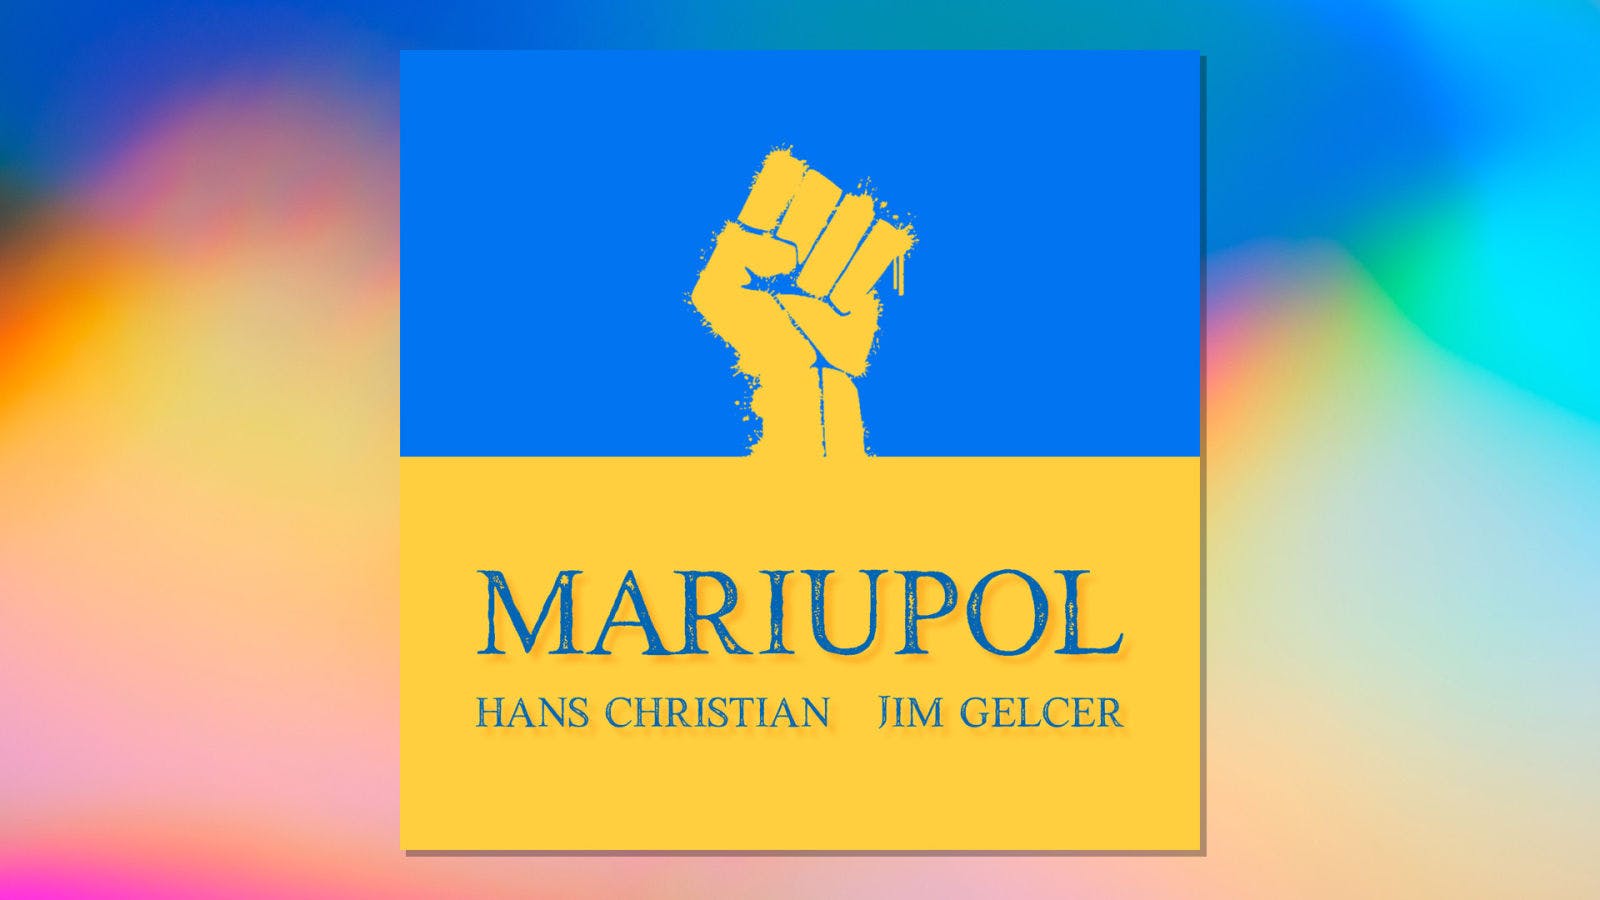 Mariupol with Jim Gelcer